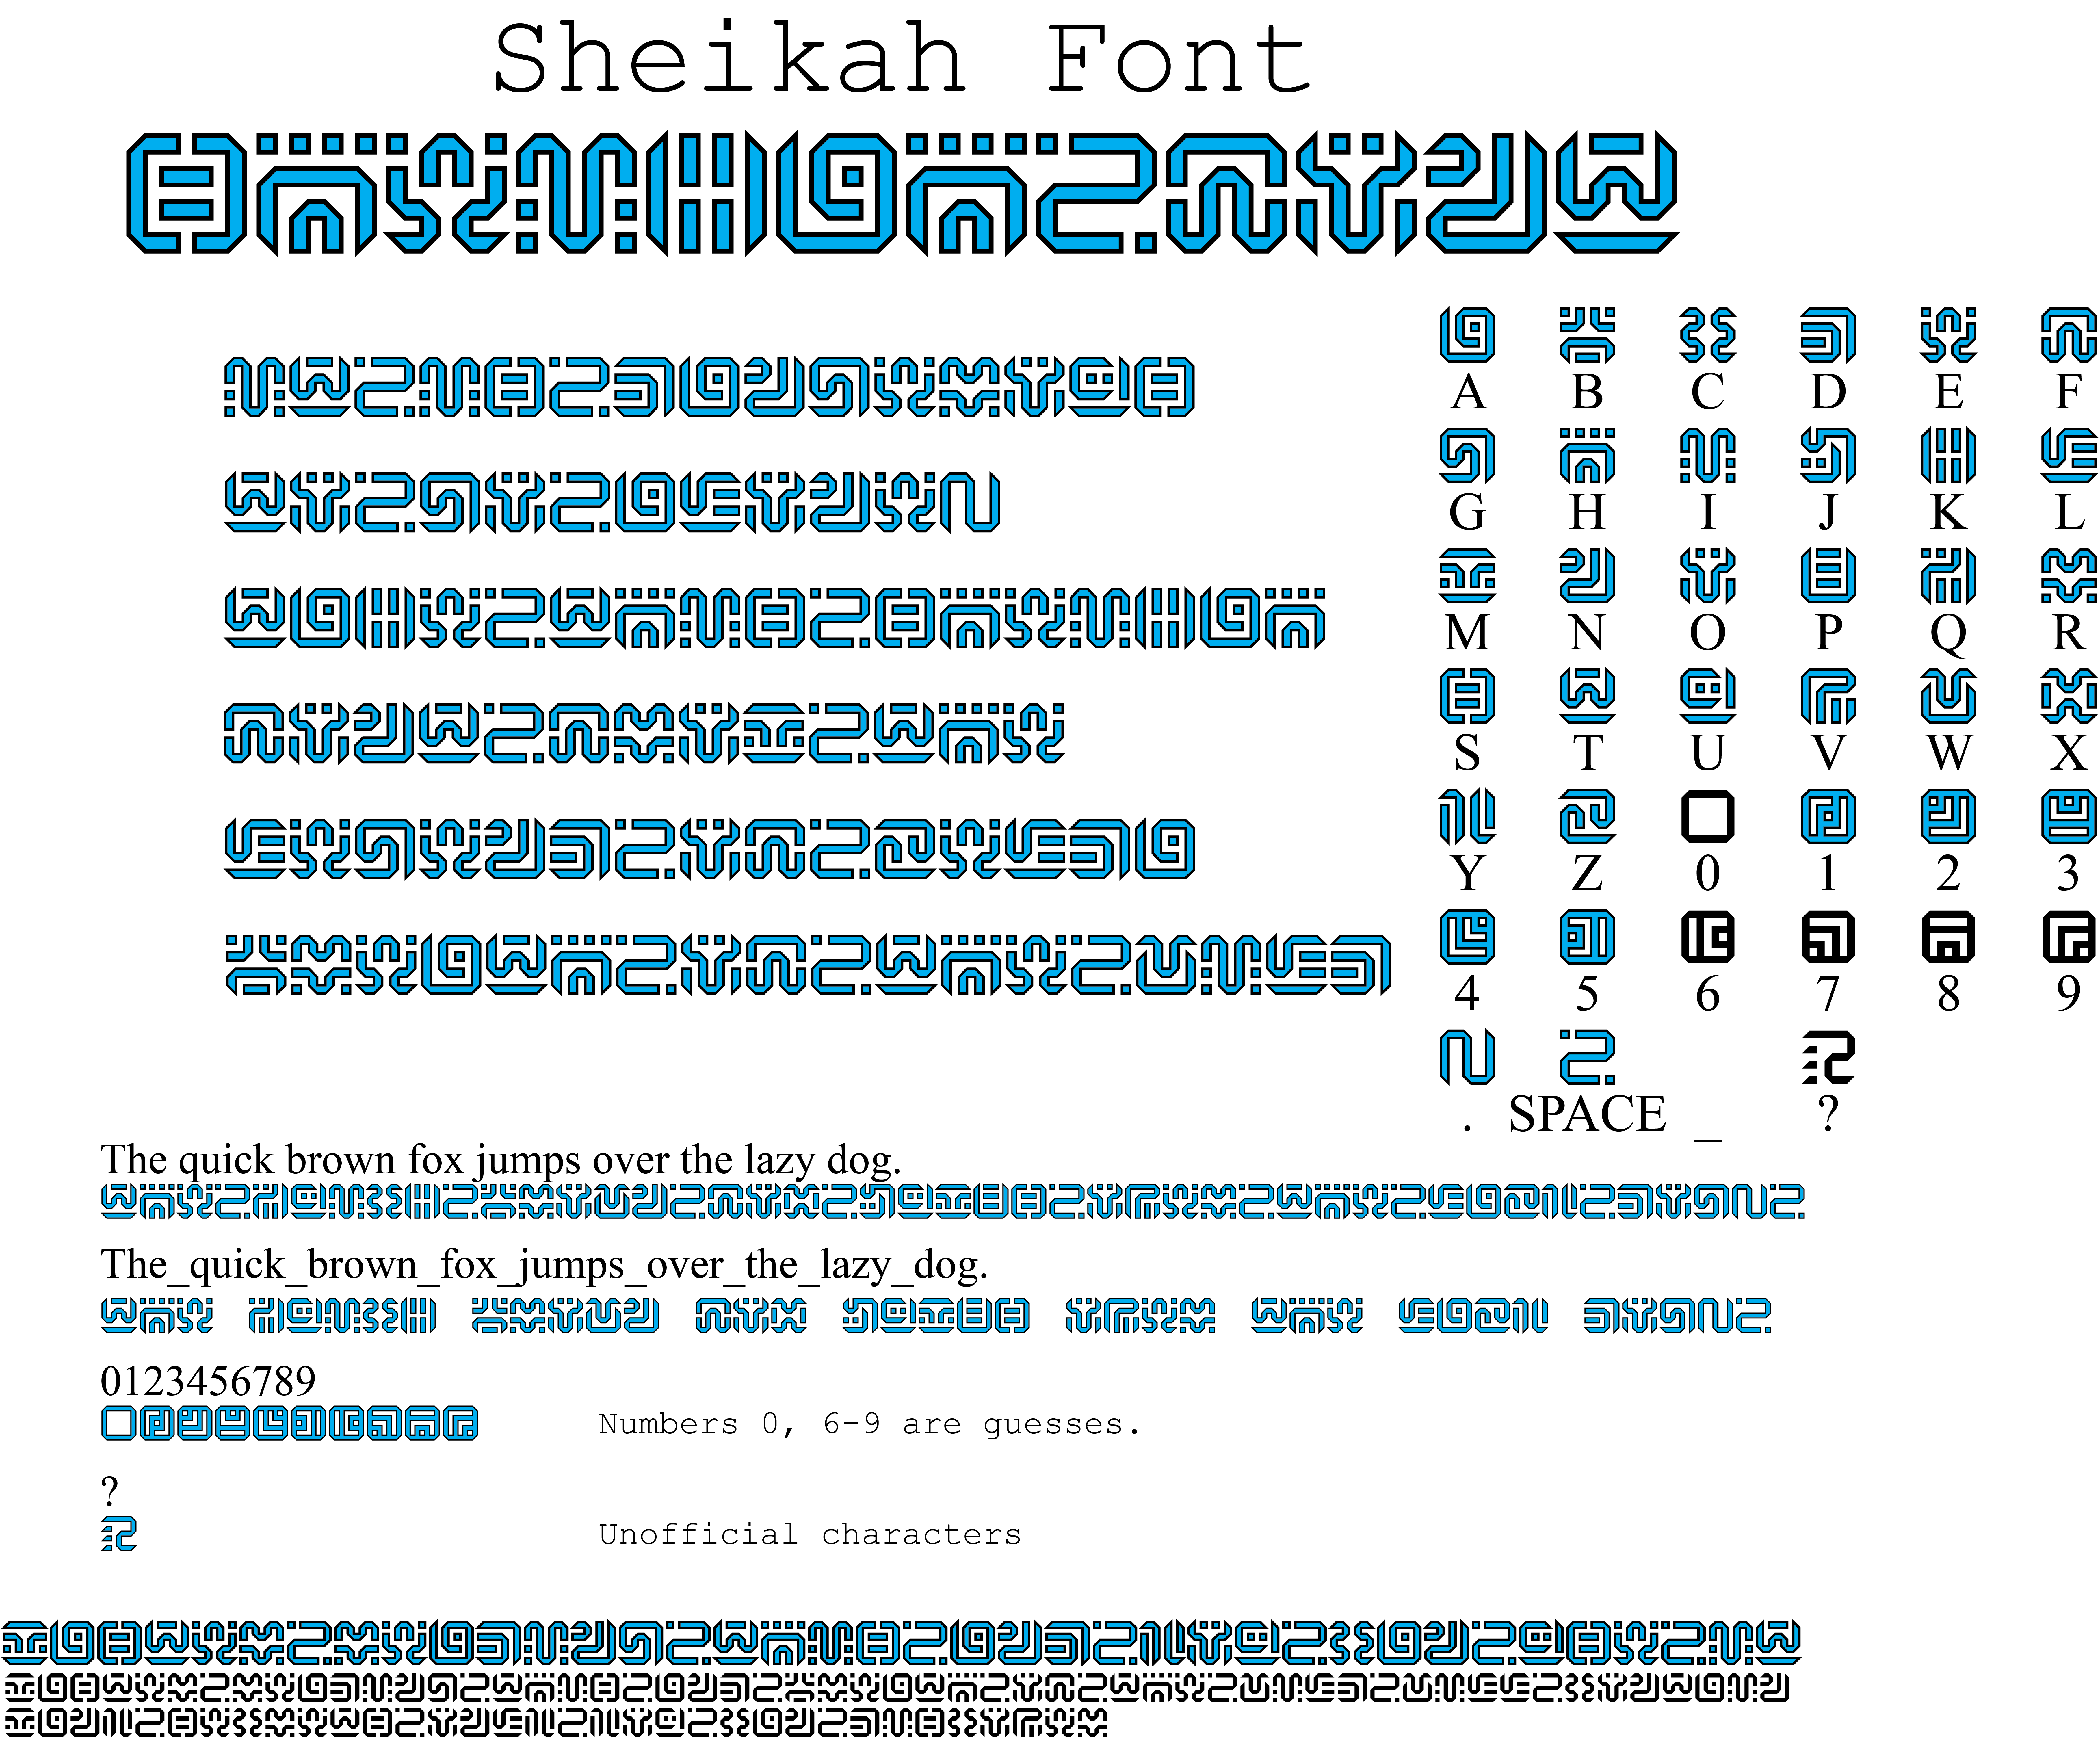 Sheikah Font Full Numbers Letters Symbols 1 2 By Proendreeper On Deviantart